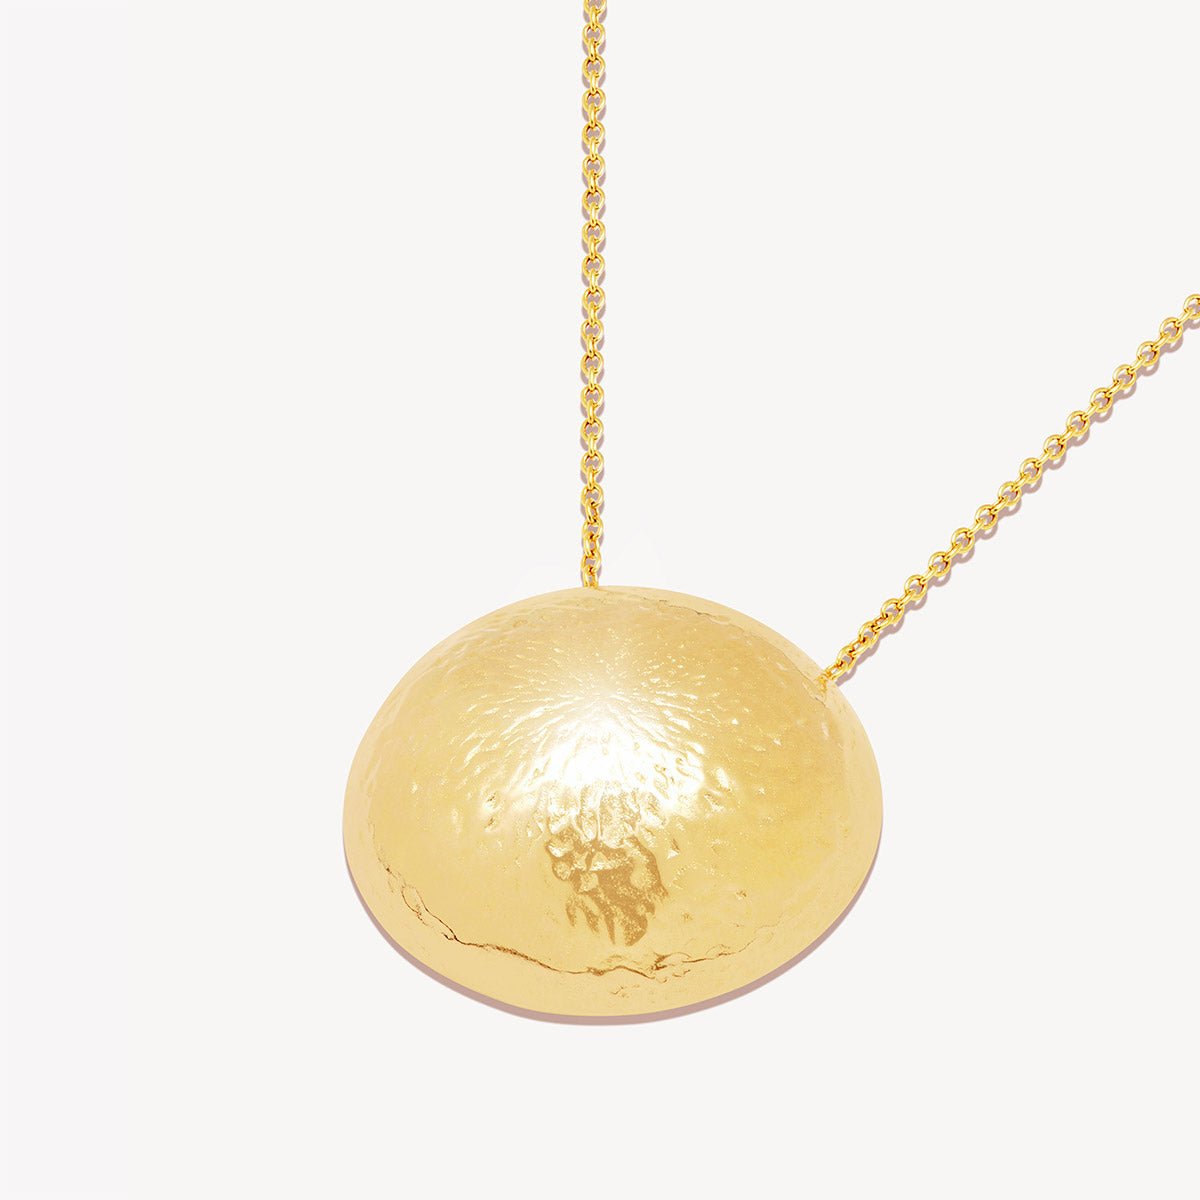 30" long gold chain necklace with 2" domed pendant